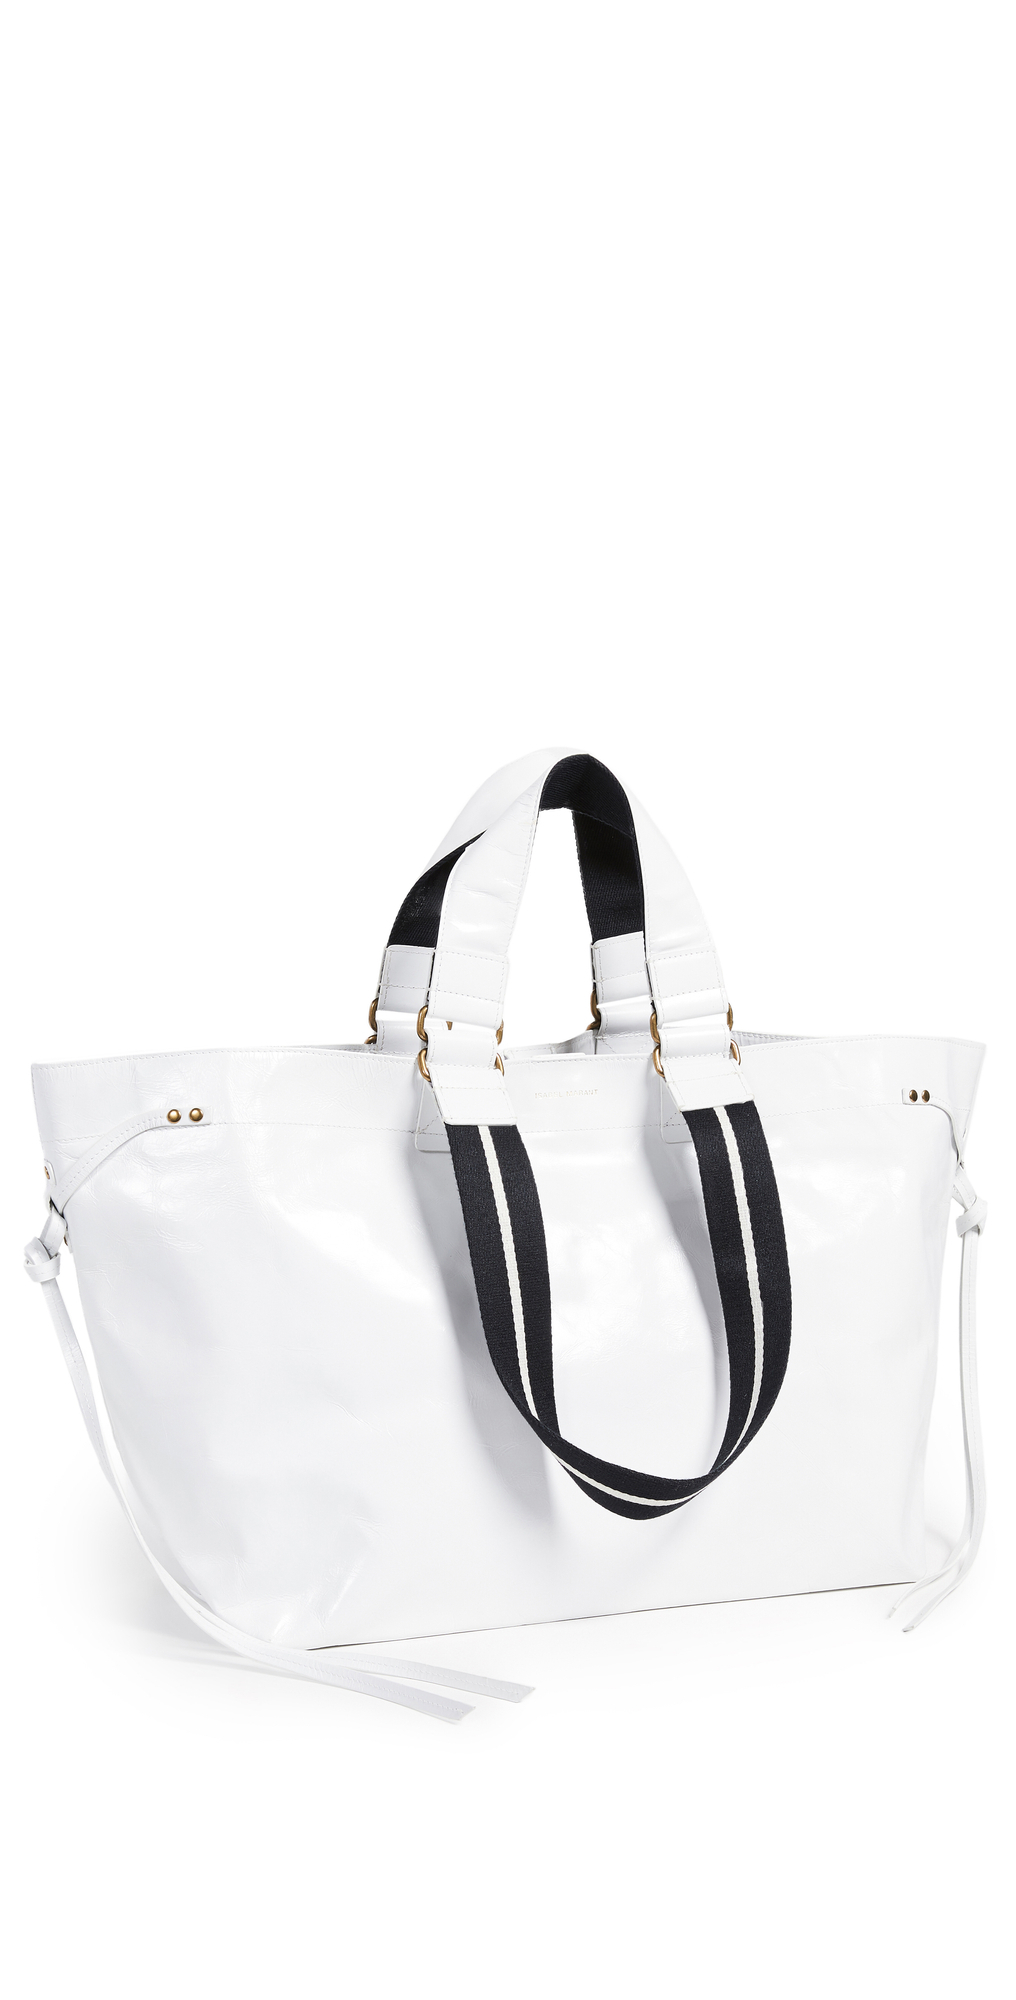 Isabel Marant Wardy New Bag in white